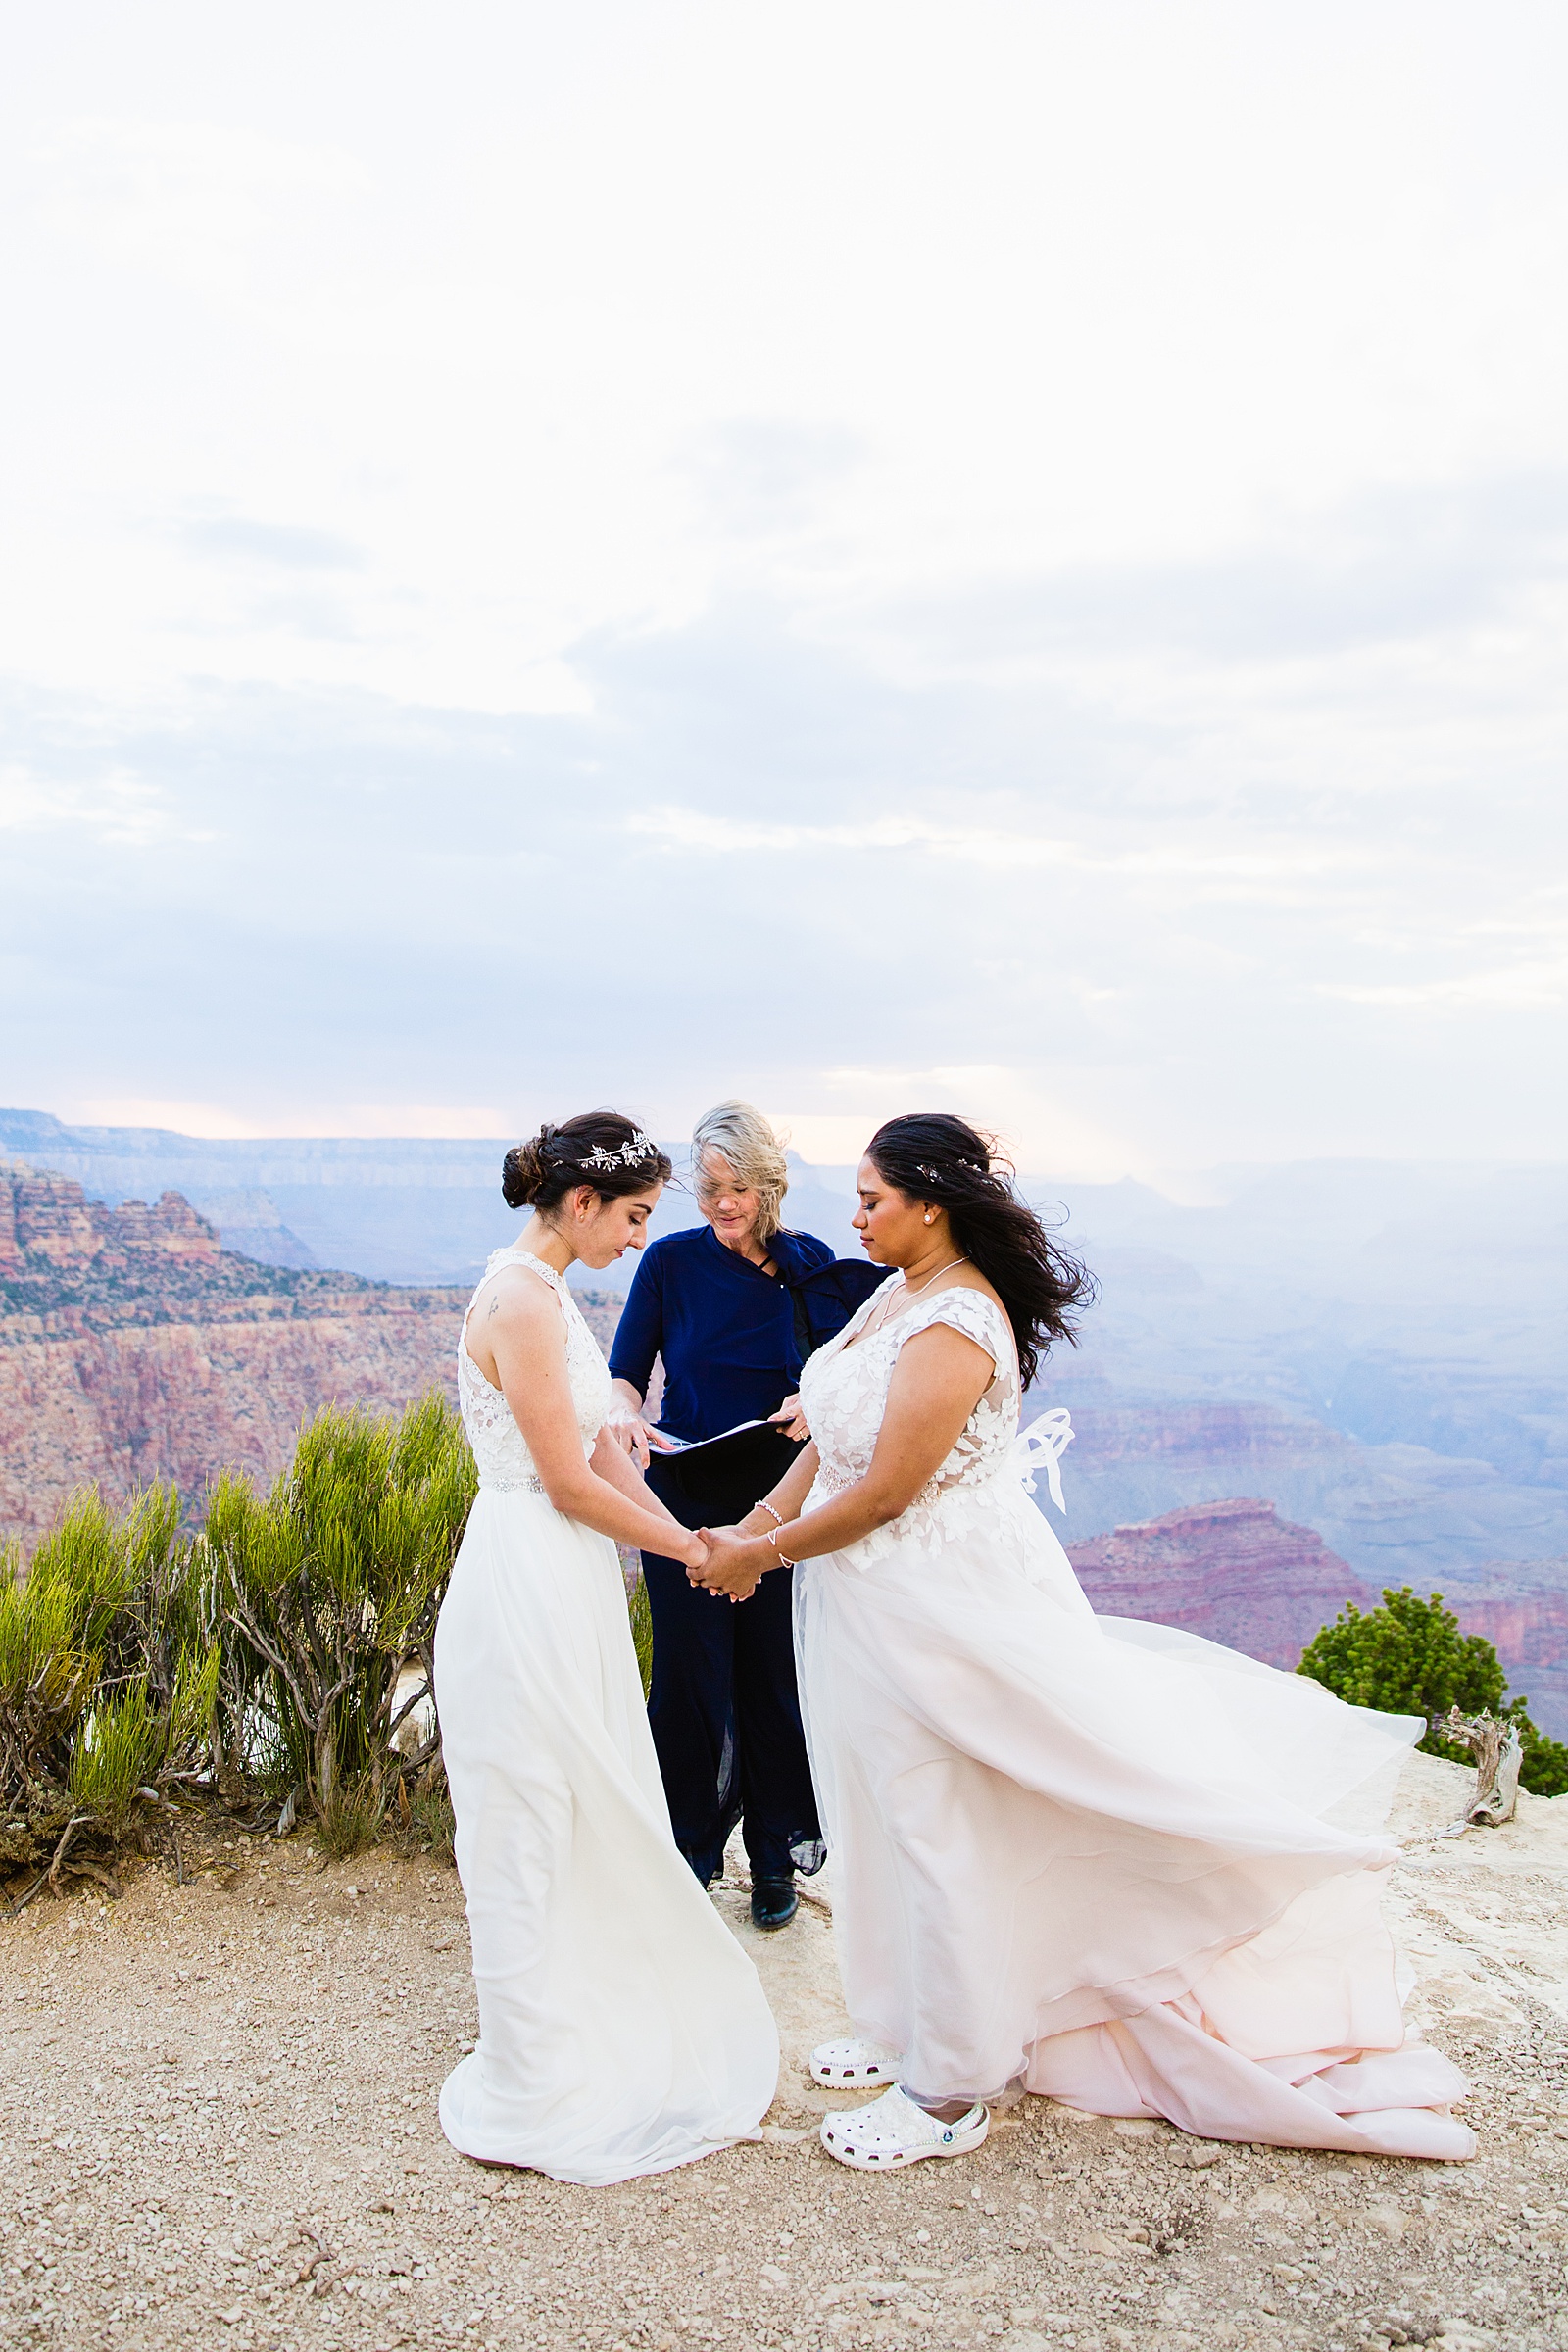 Same sex couple togethering during Moran Point wedding ceremony by Grand Canyon elopement photographer PMA Photography.